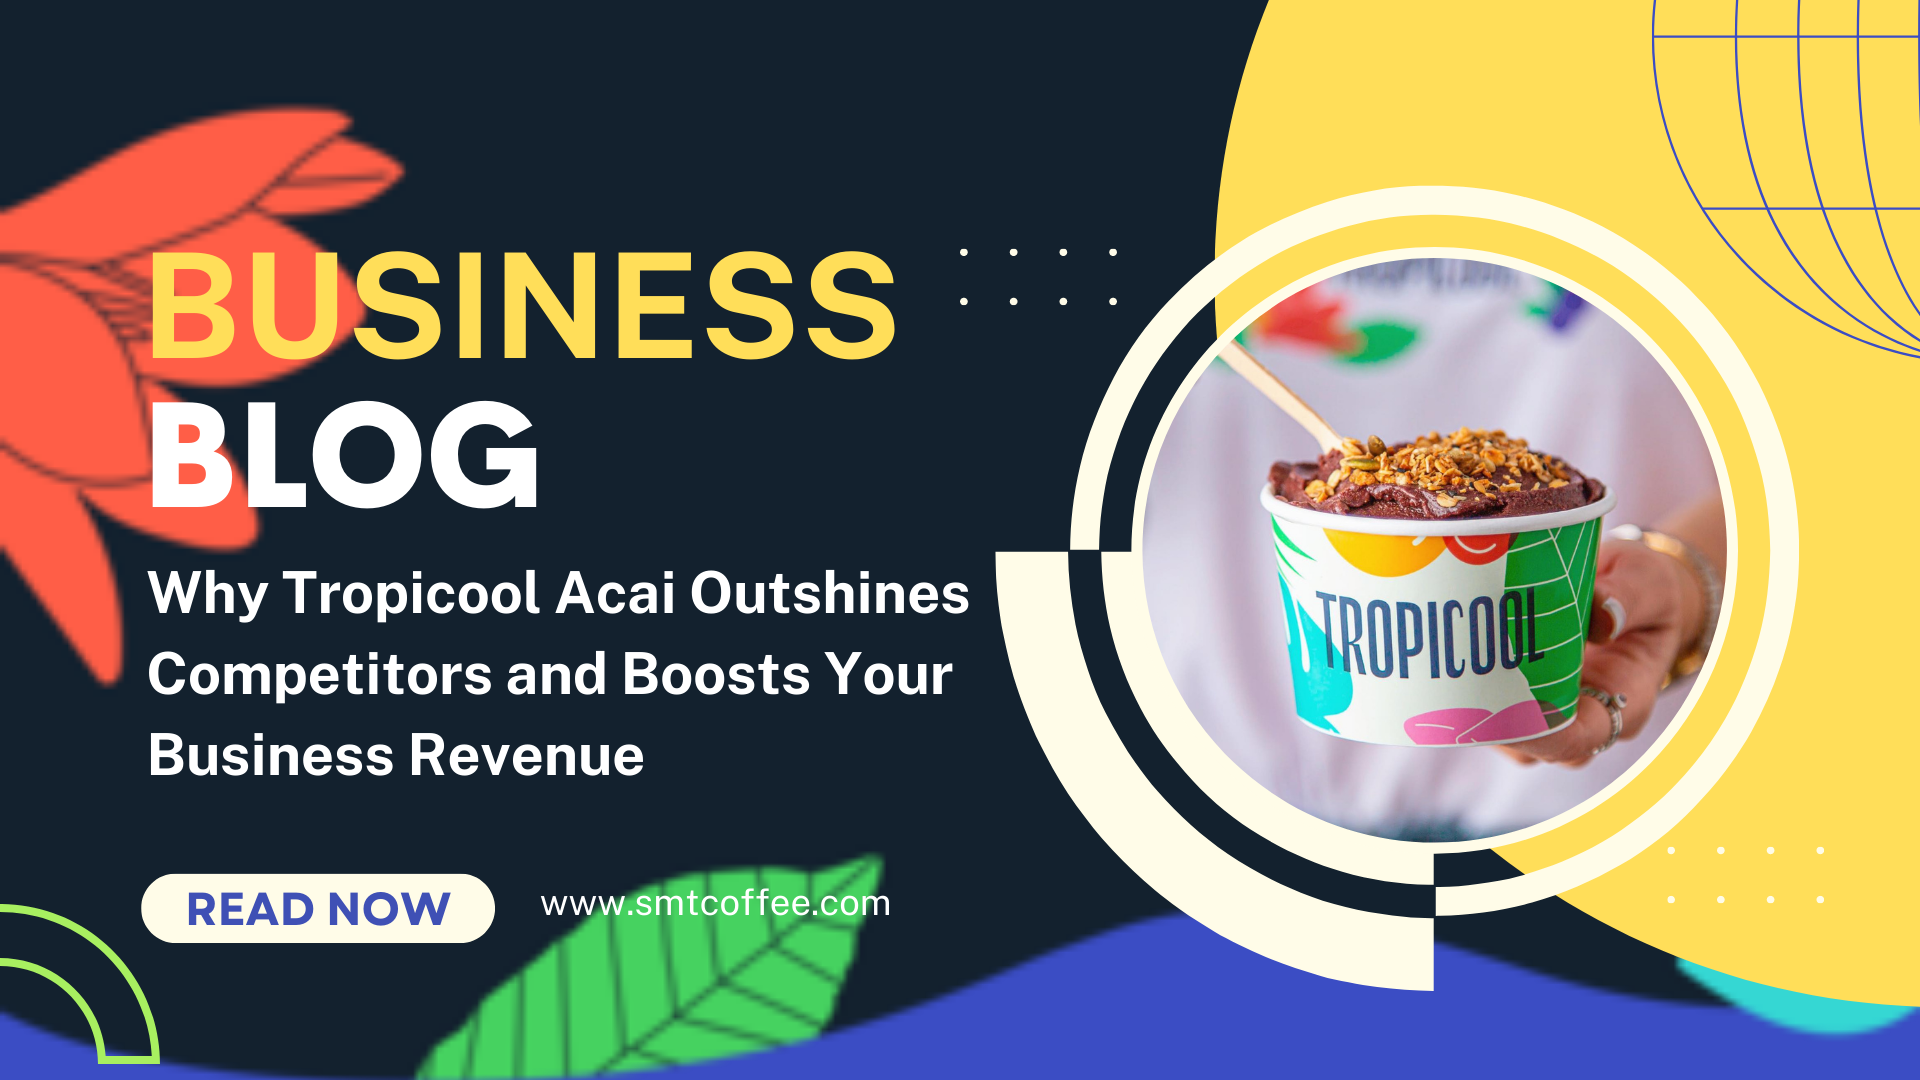 Why Tropicool Acai Outshines Competitors and Boosts Your Business Revenue